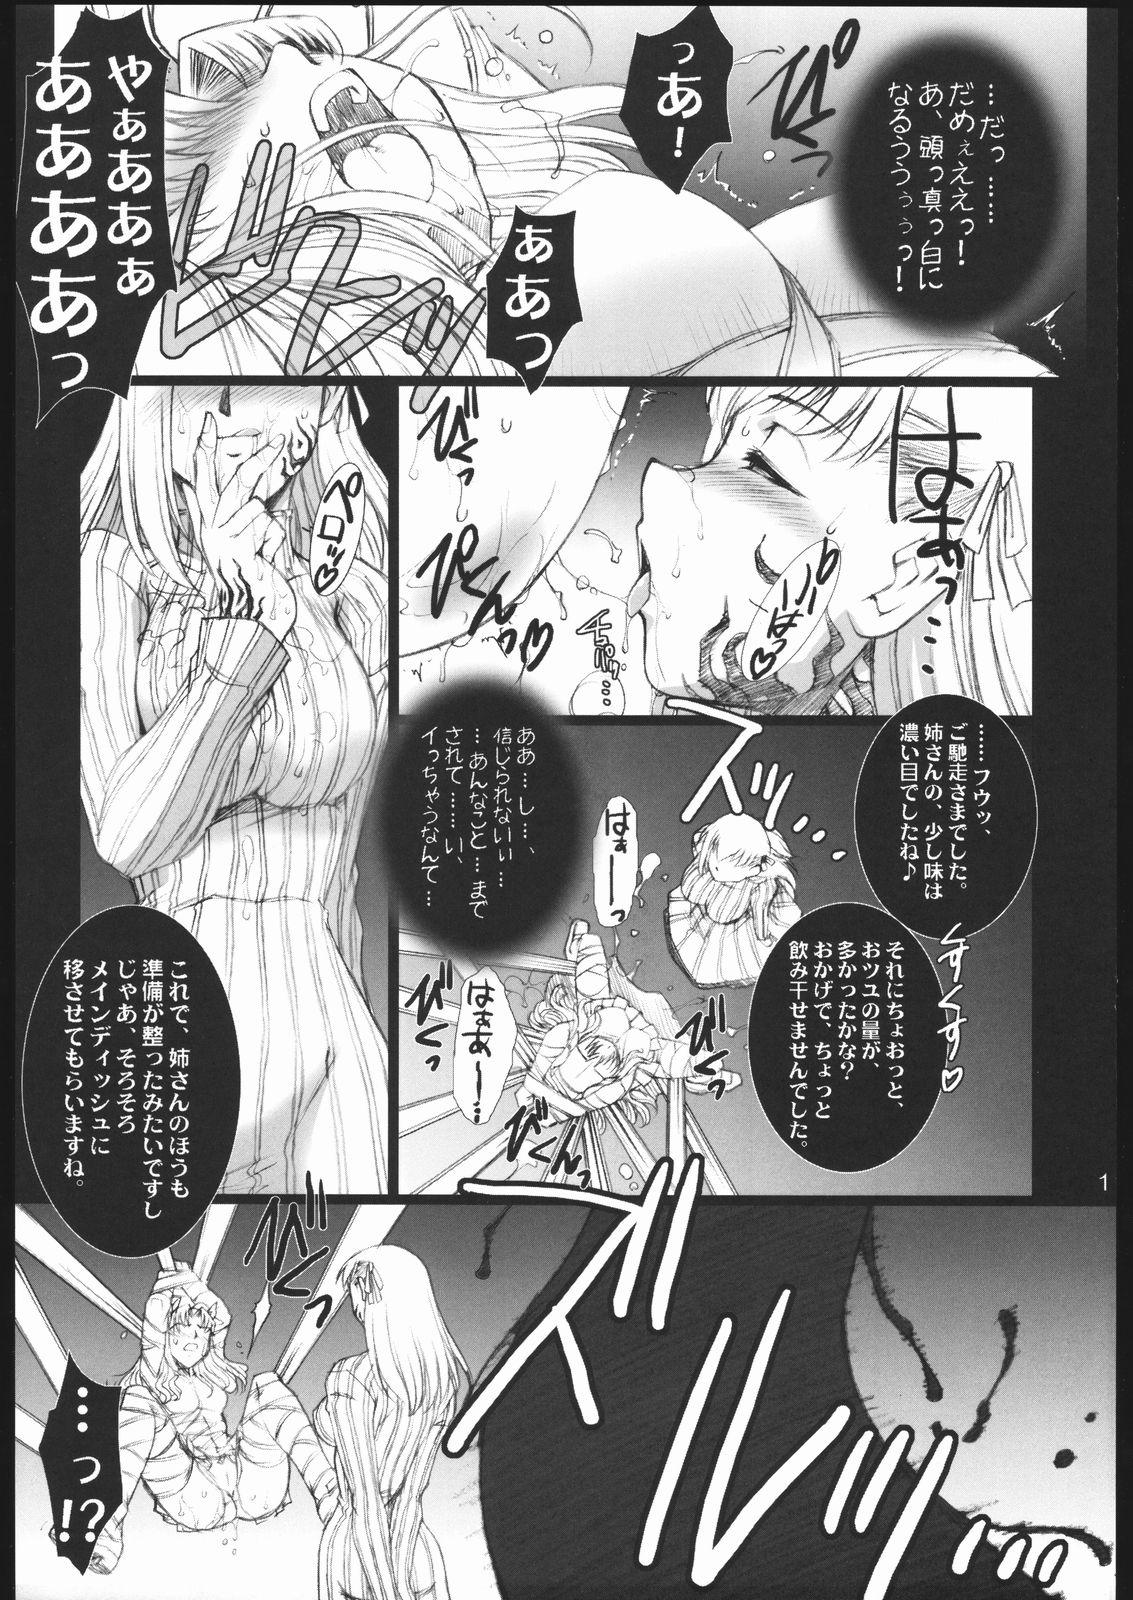 Cream Pie Red Degeneration - Fate stay night The - Page 10